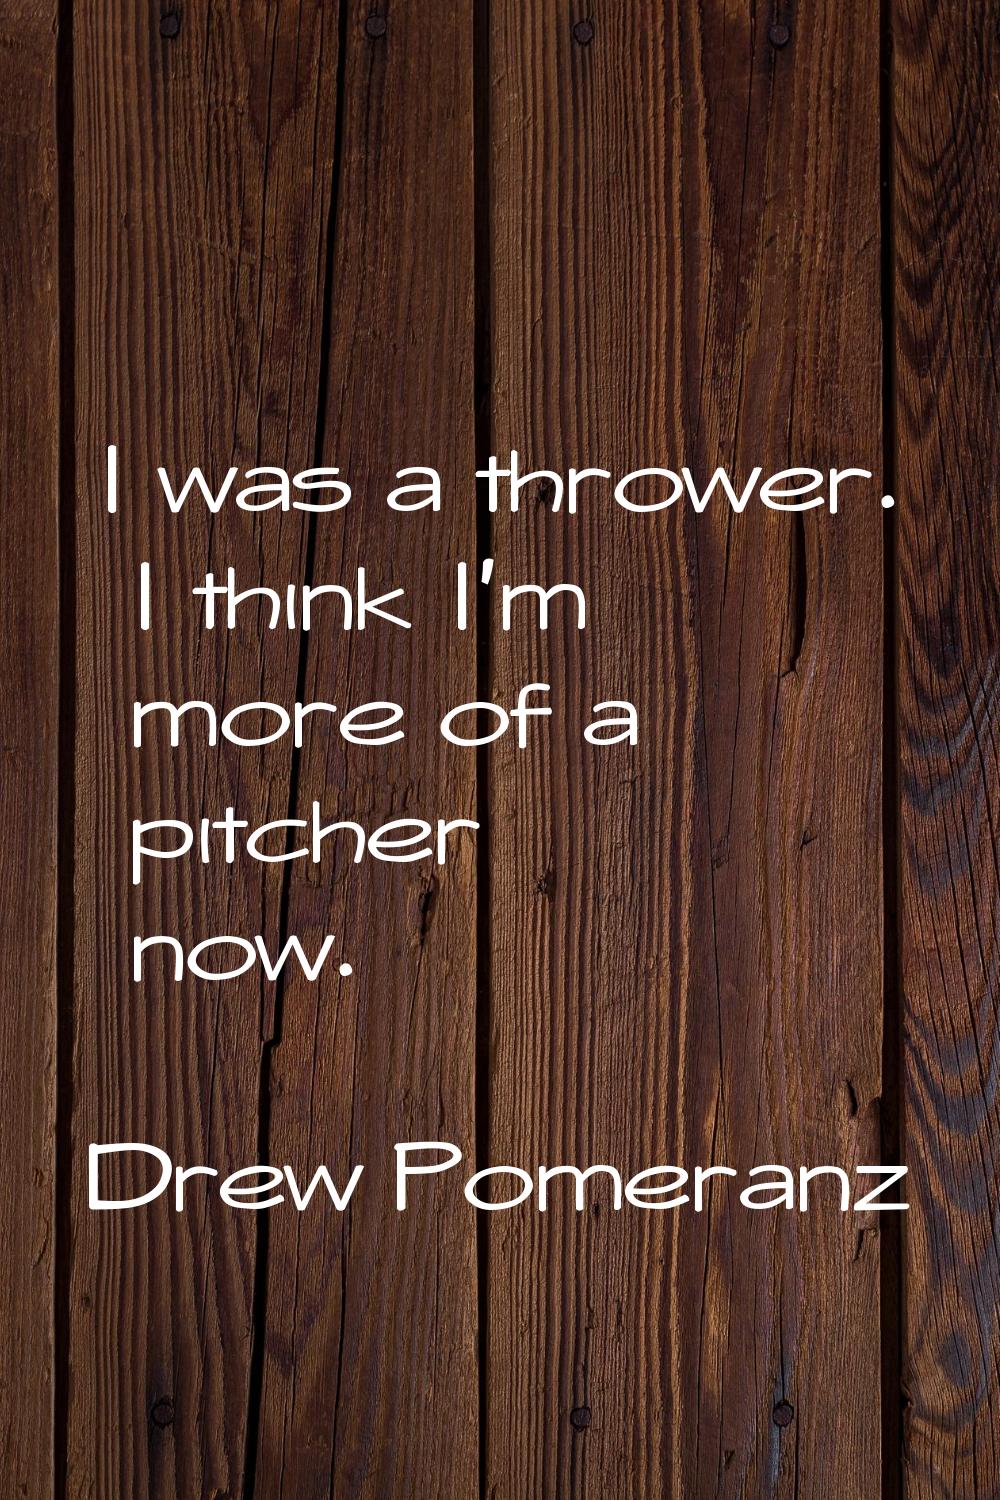 I was a thrower. I think I'm more of a pitcher now.